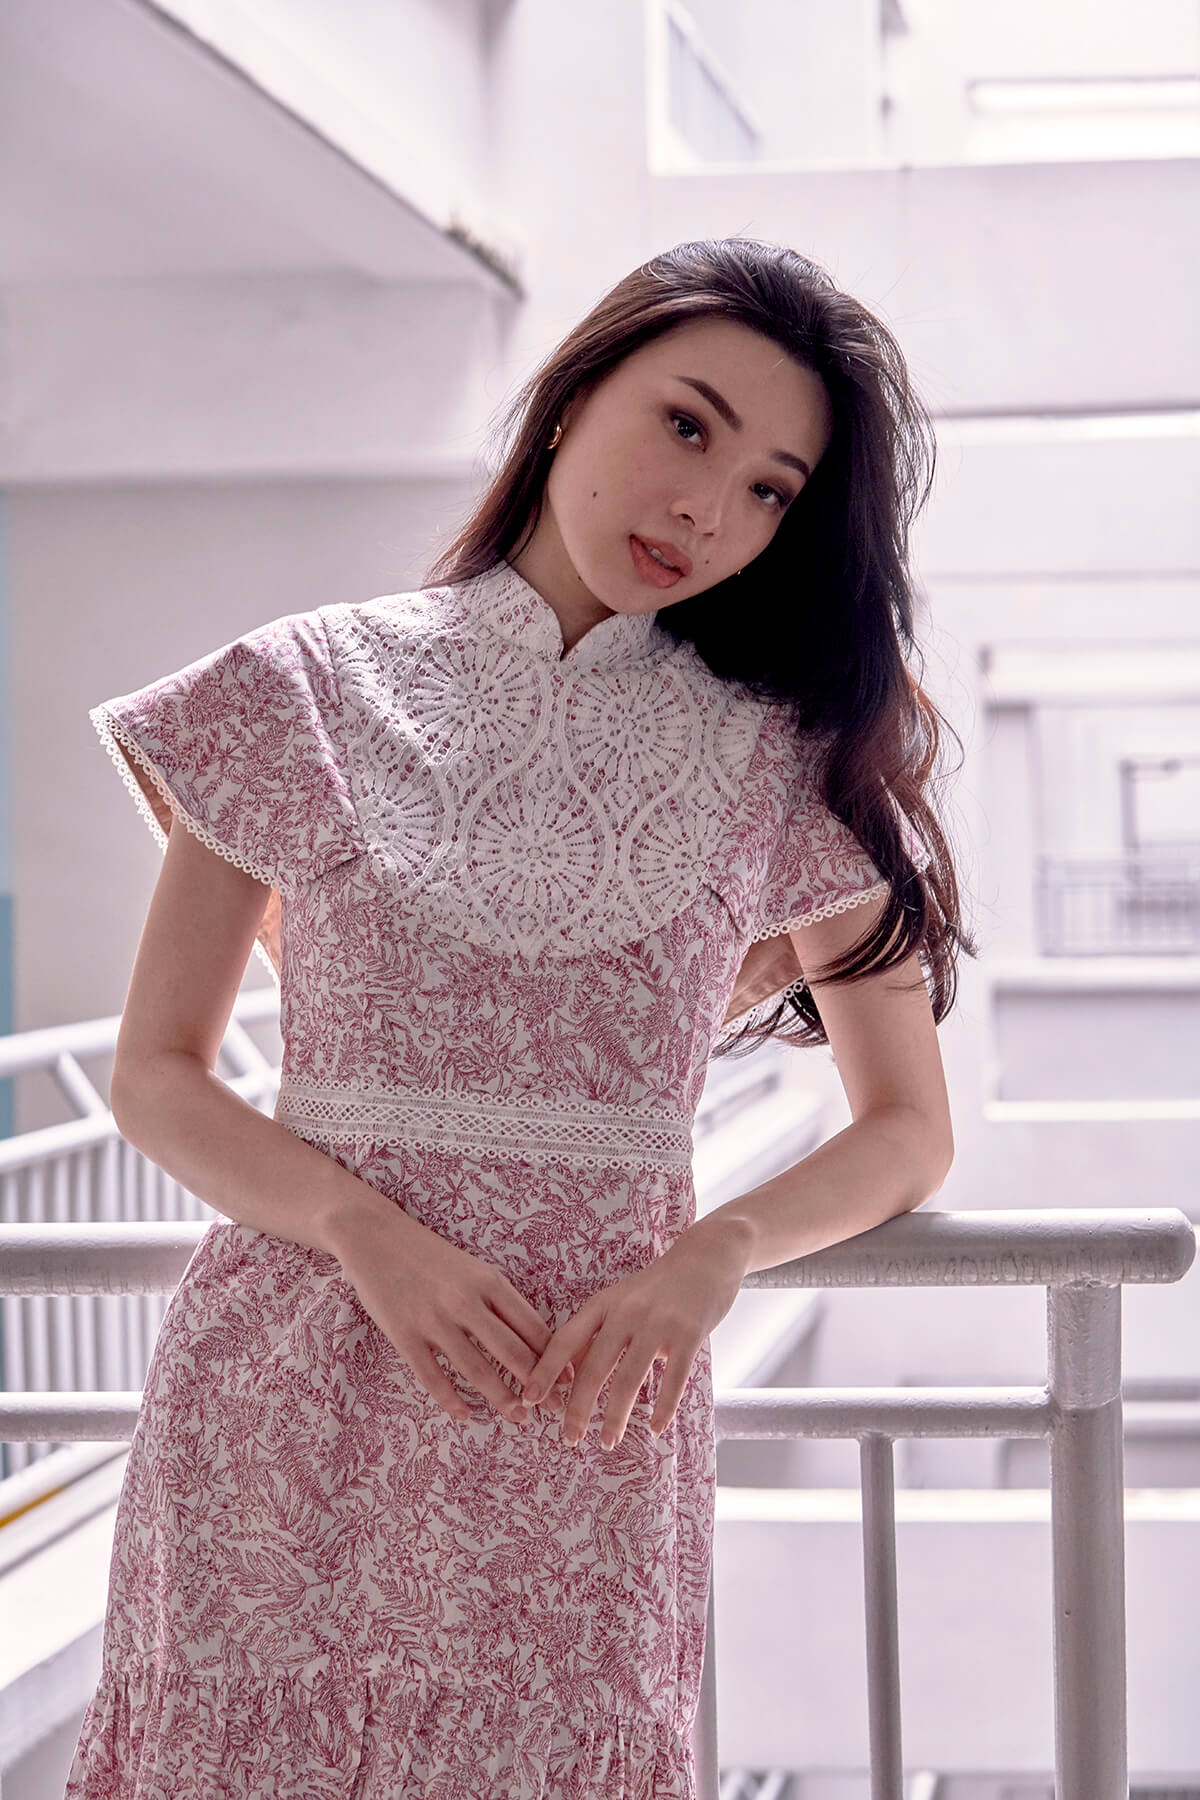 Chinese lady wearing a red and white foliage print qipao dress. Dress has cape like sleeves, lace overlay details and stand up mandarin collar. She tilts her head and has her elbow on the railings.